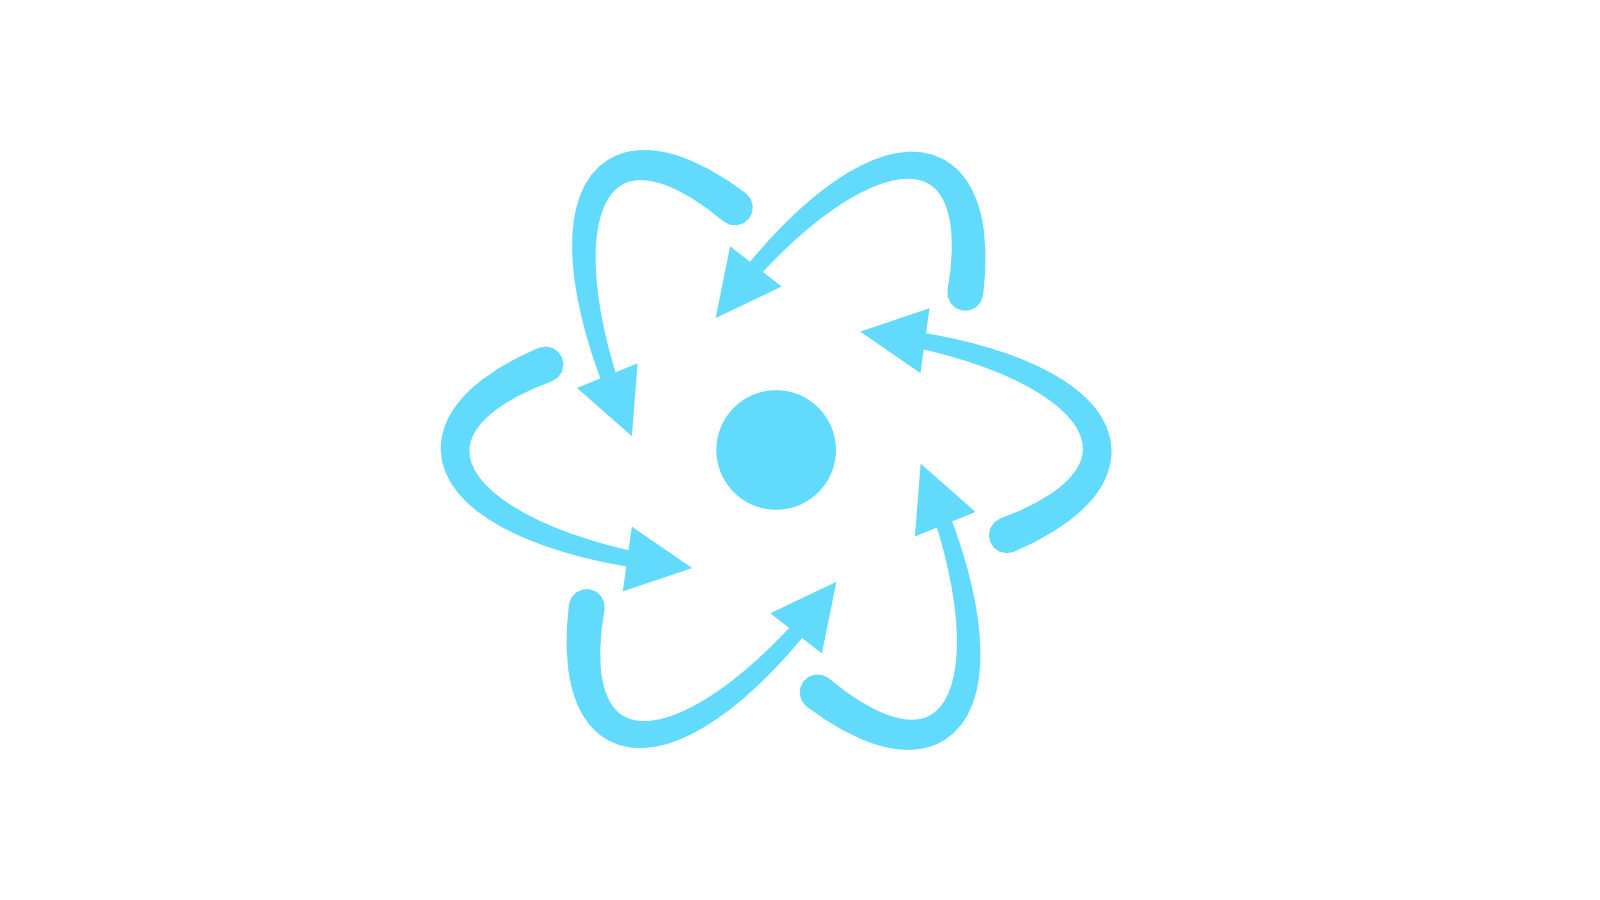 The self-fulfilling prophecy of React - Josh Collinsworth blog